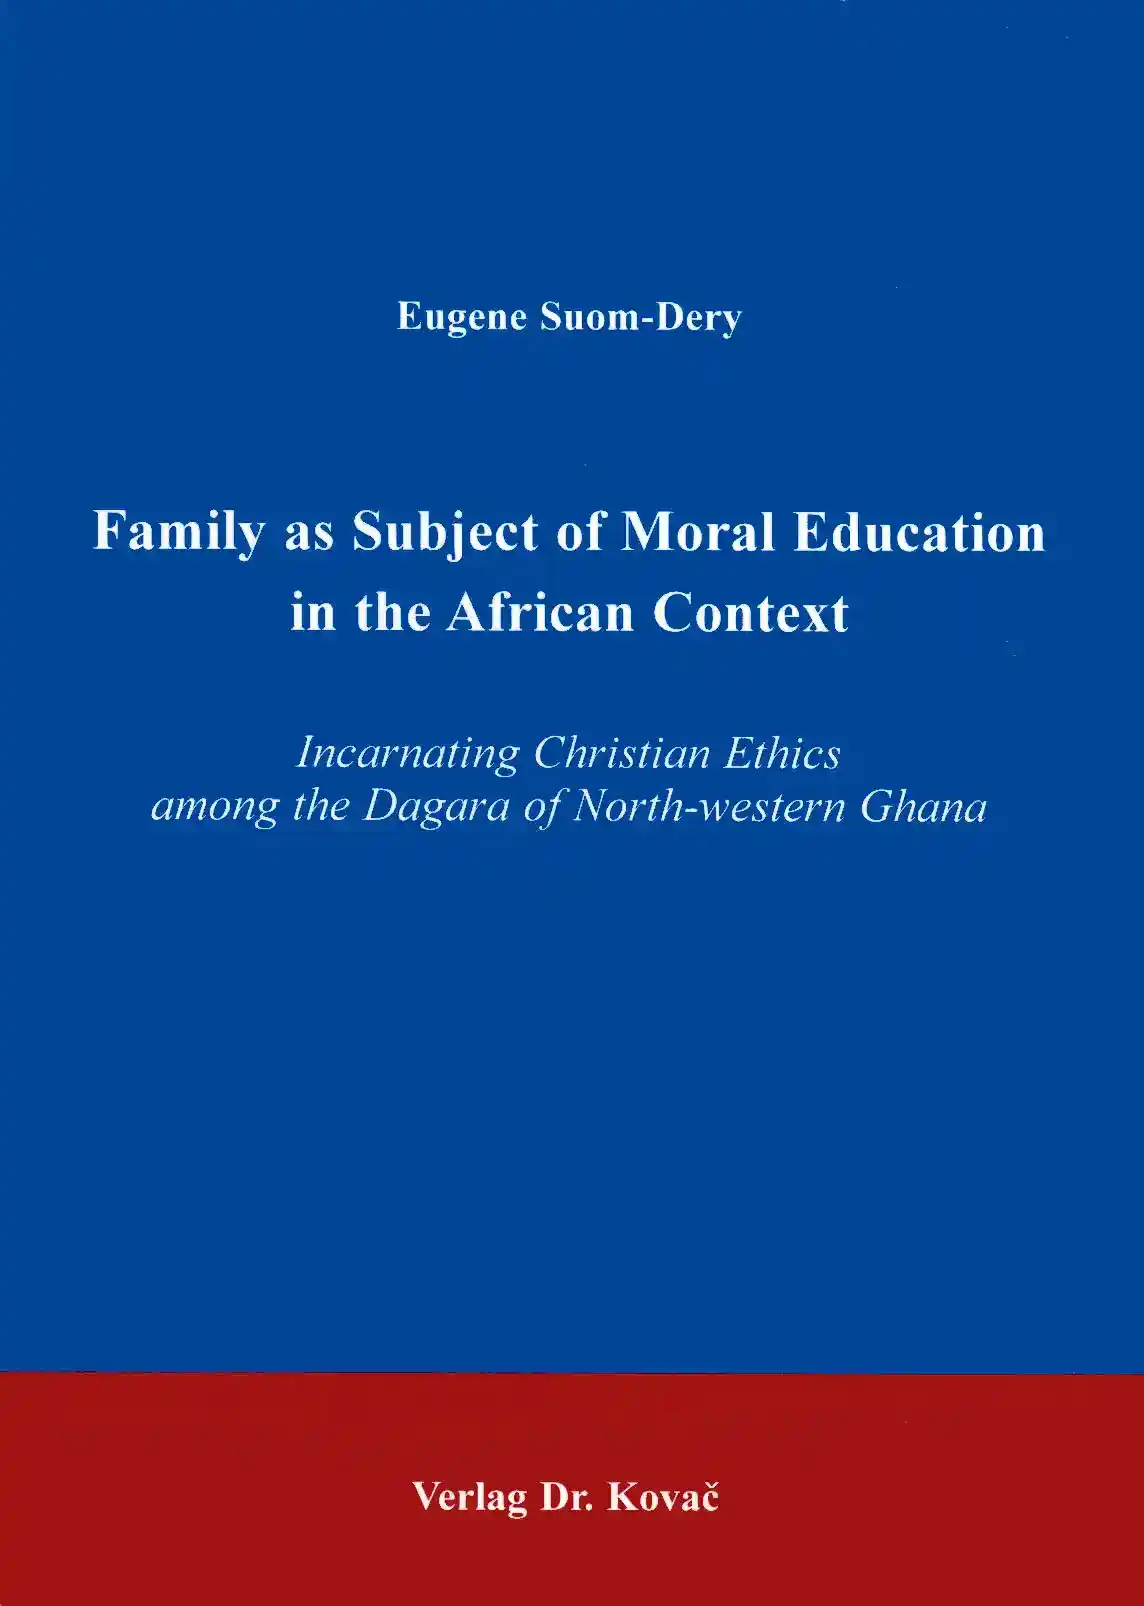 Dissertation: The Family as Subject of Moral Education in the African Context